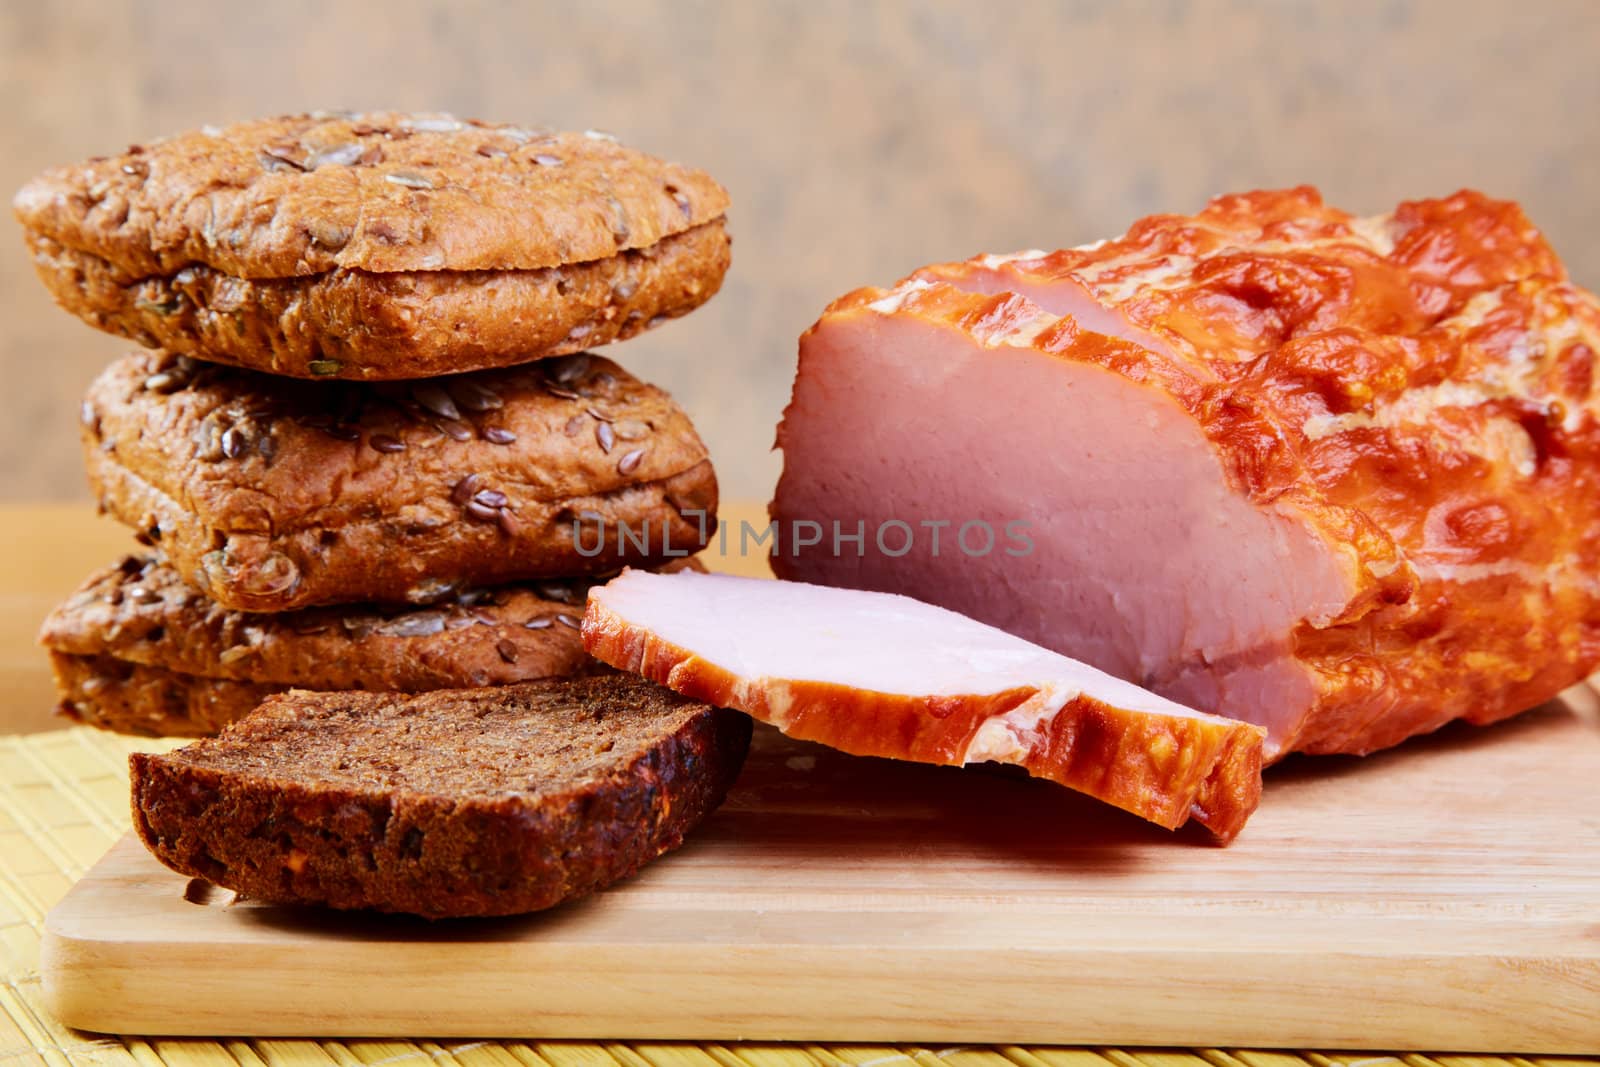 The sliced ham and bread slices